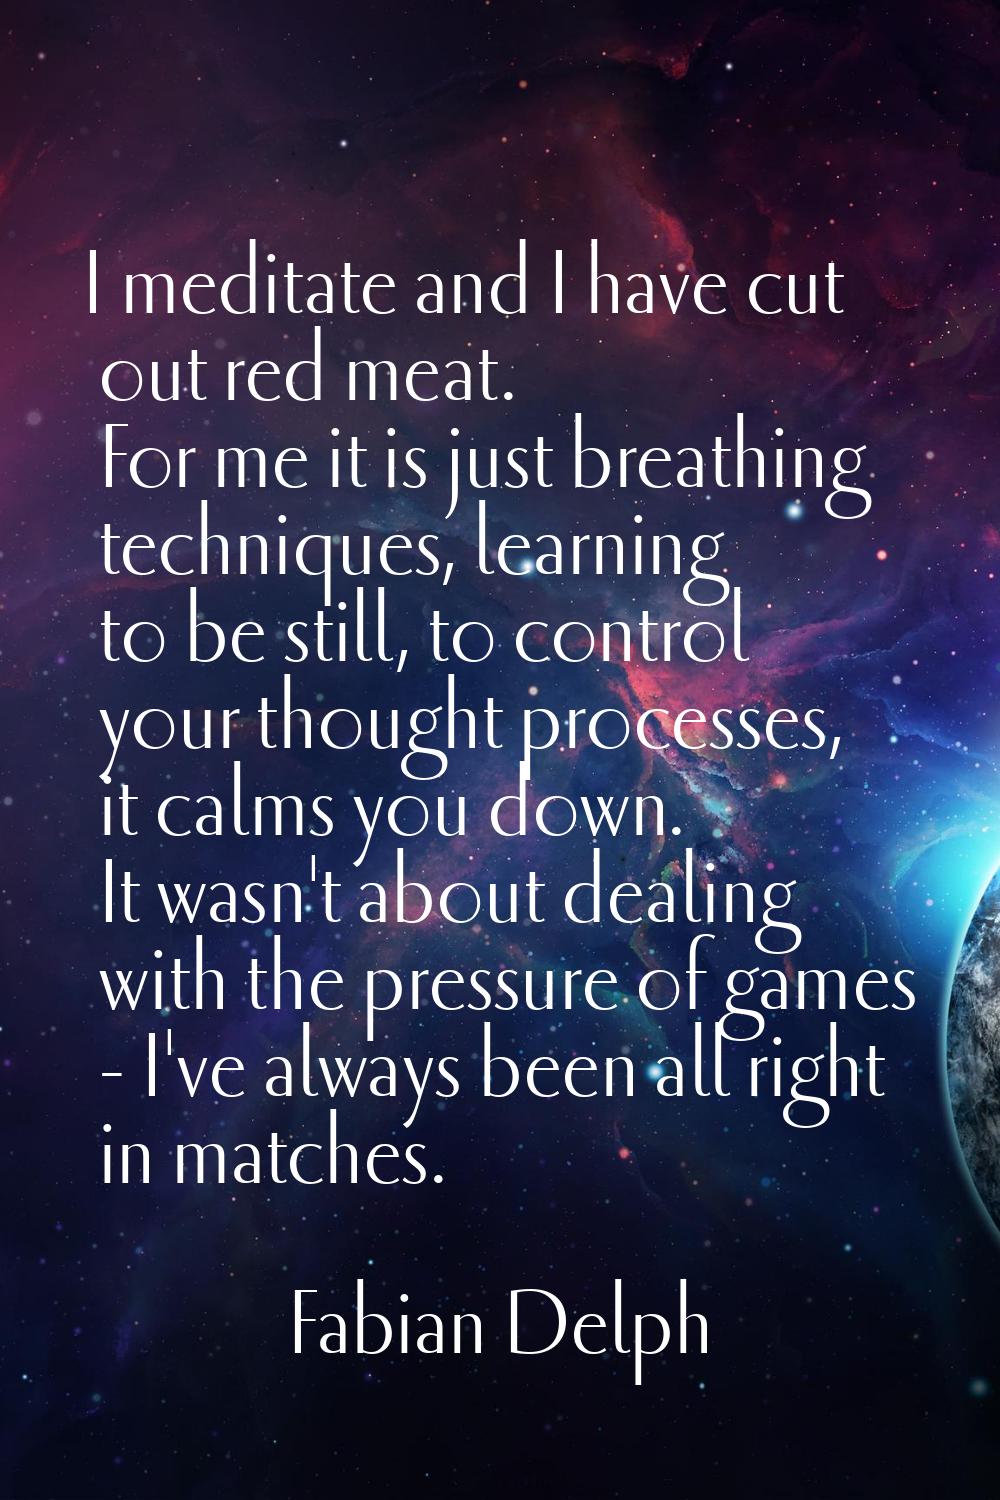 I meditate and I have cut out red meat. For me it is just breathing techniques, learning to be stil